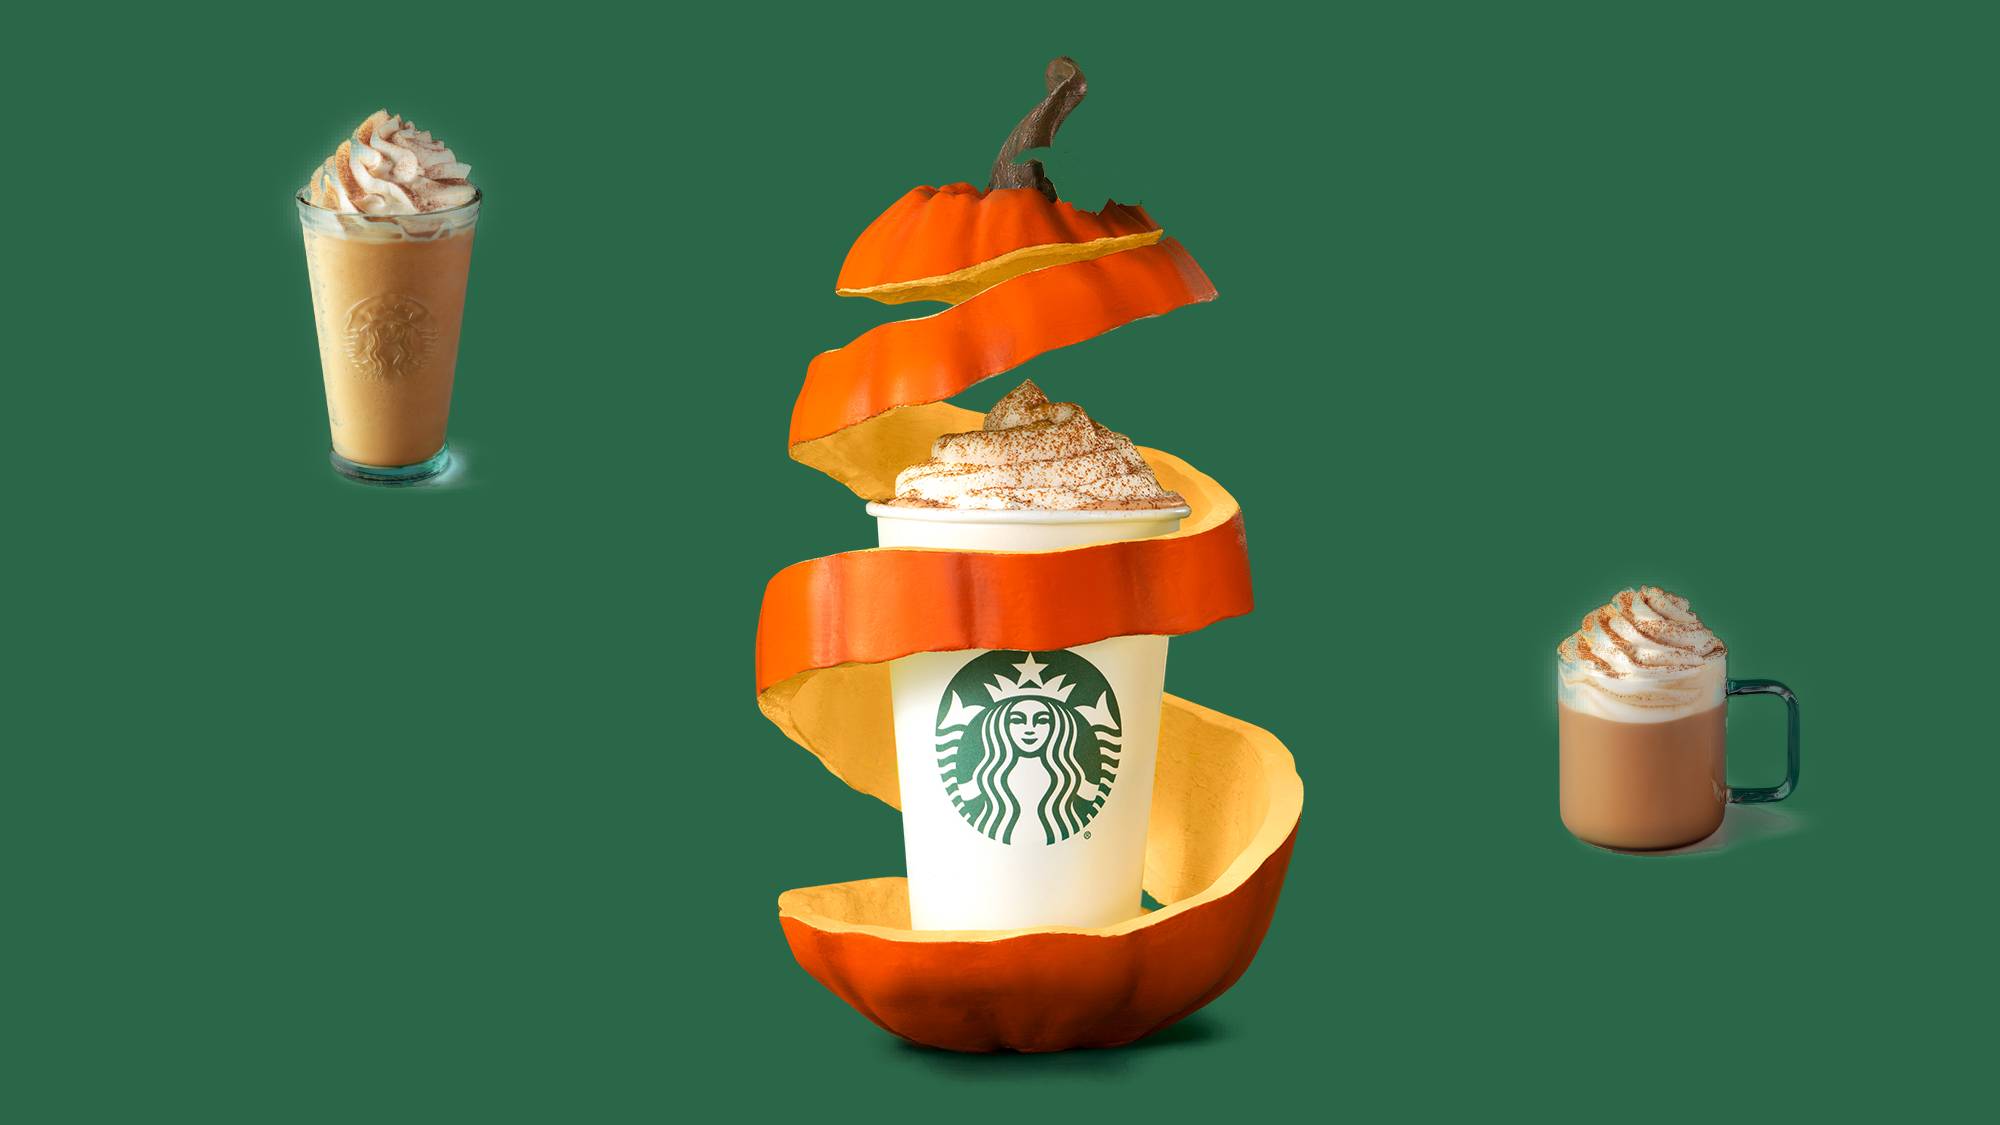 It's that time of year again - the Starbucks Pumpkin Spice Latte is back |  Marie Claire UK